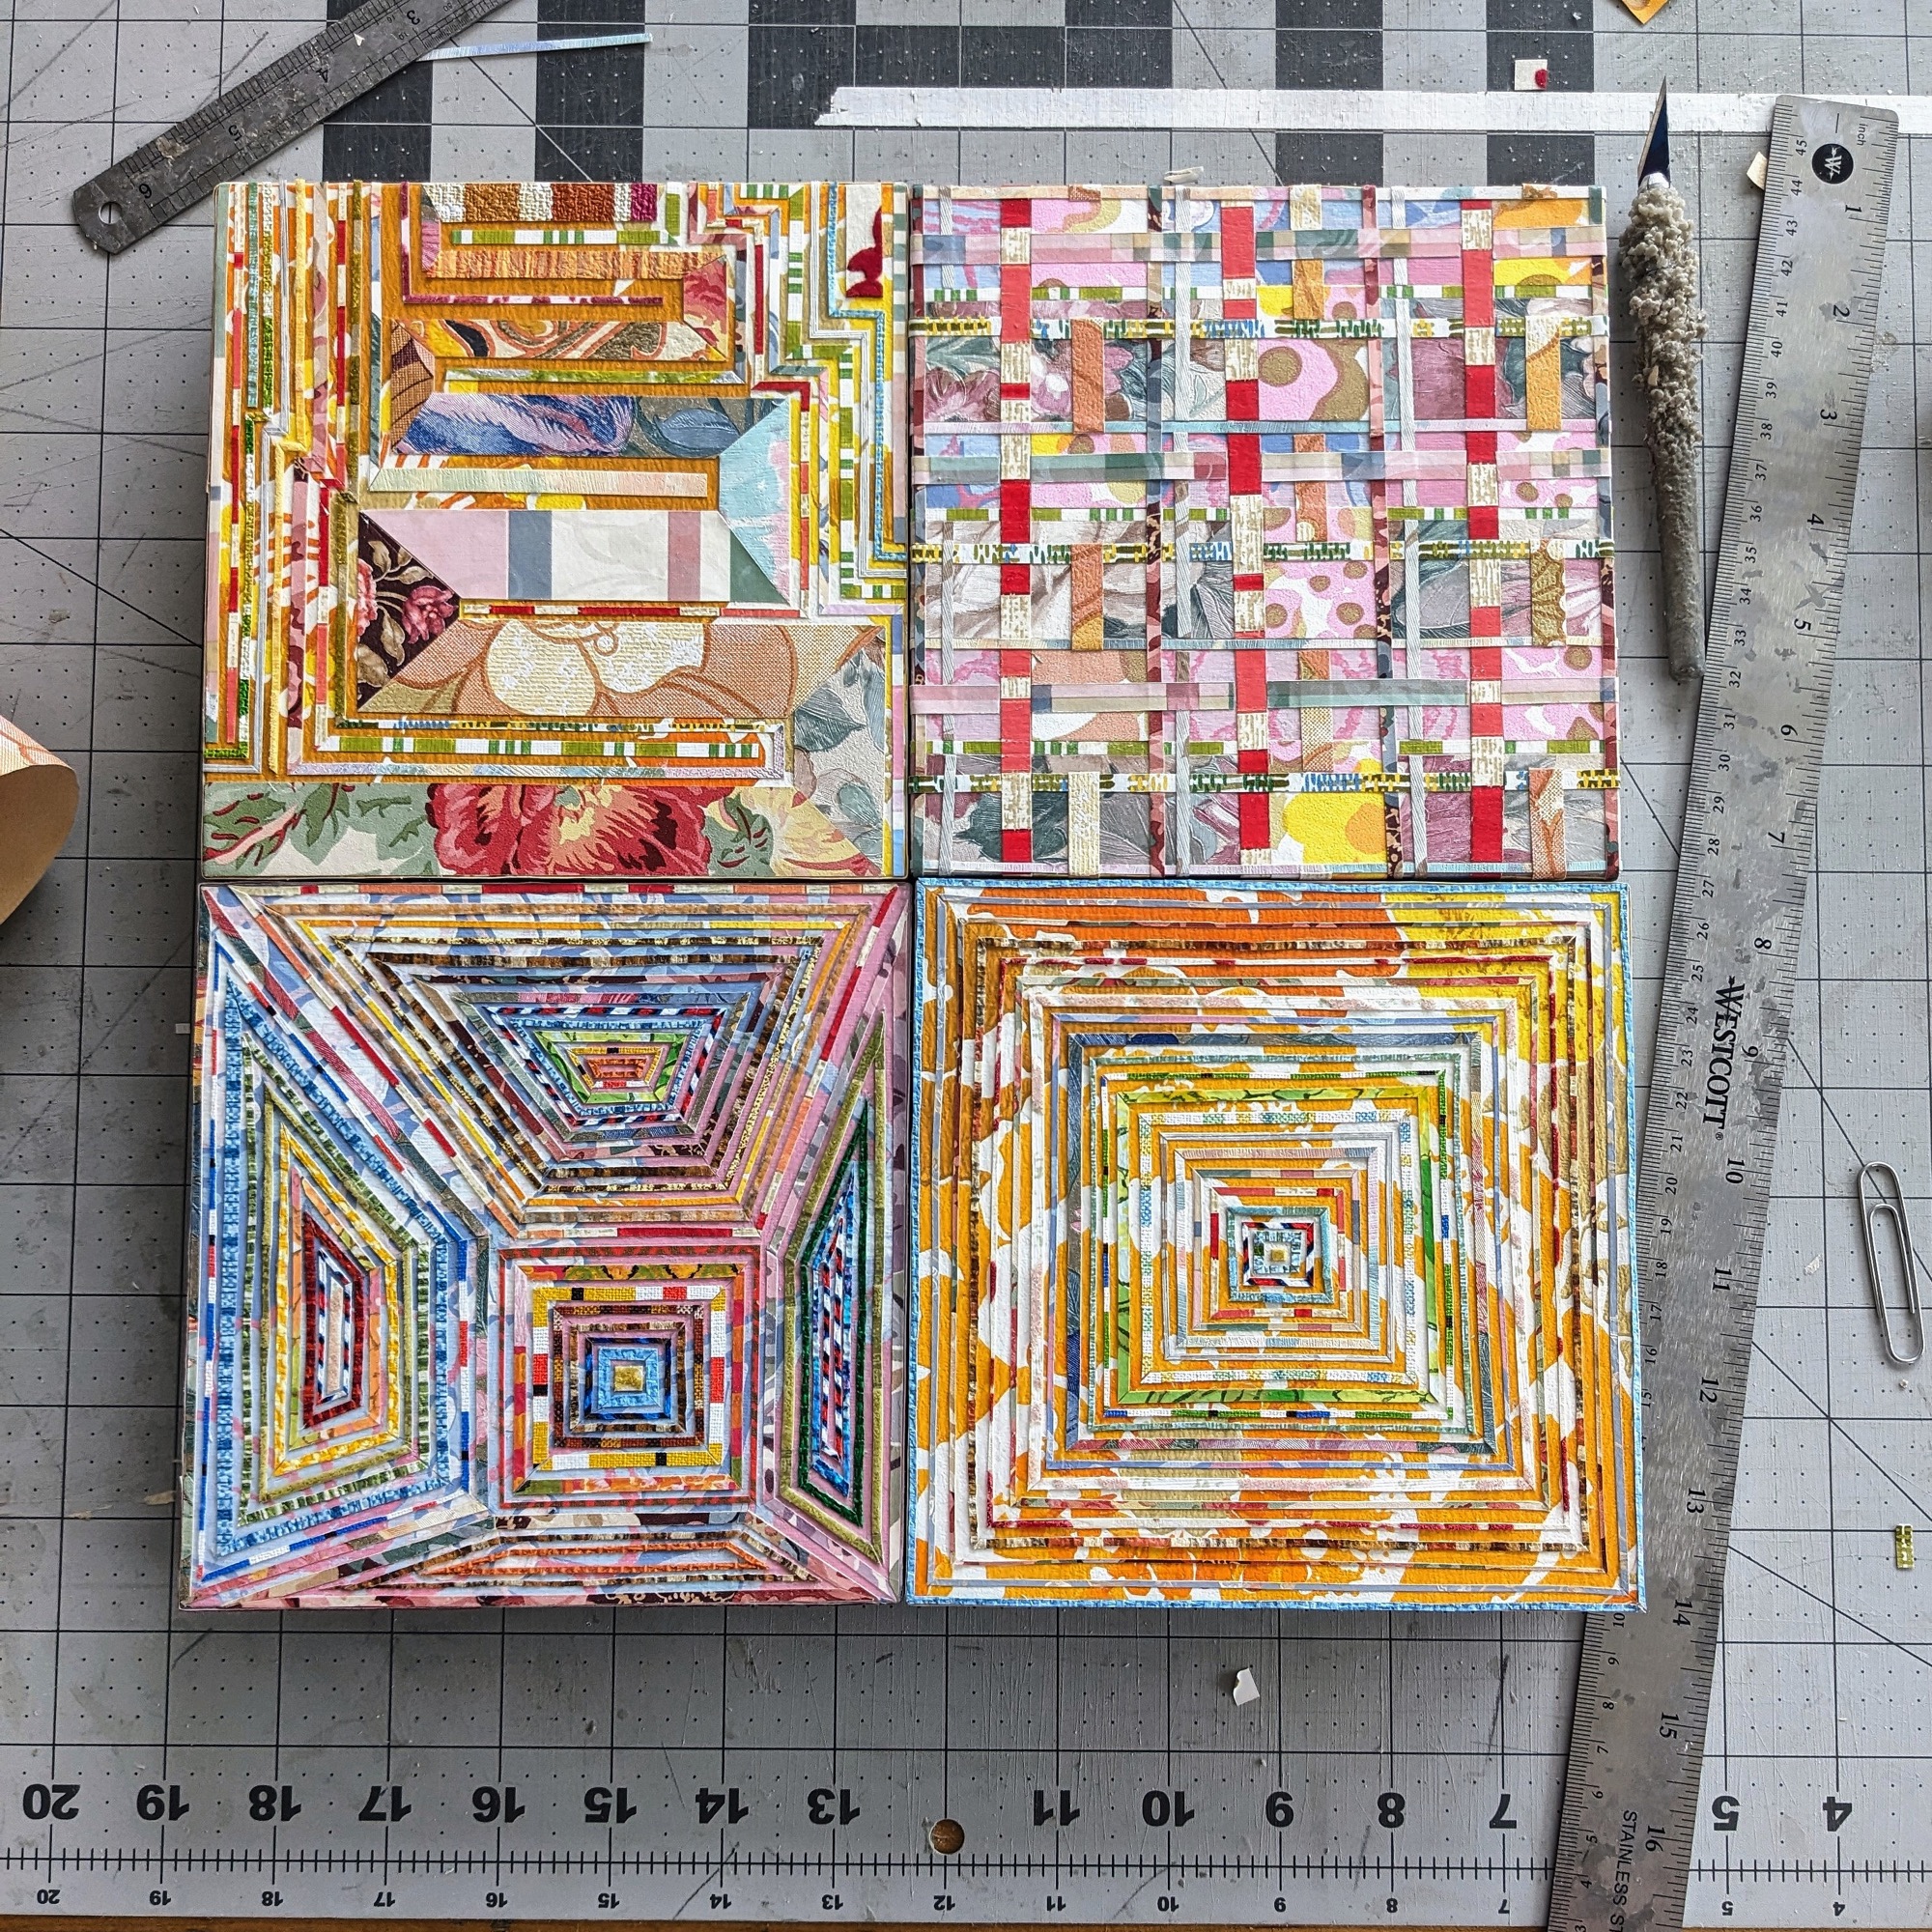 four small, square artworks made from strips of vintage wallpaper, grouped together on a work table with a ruler and other tools nearby